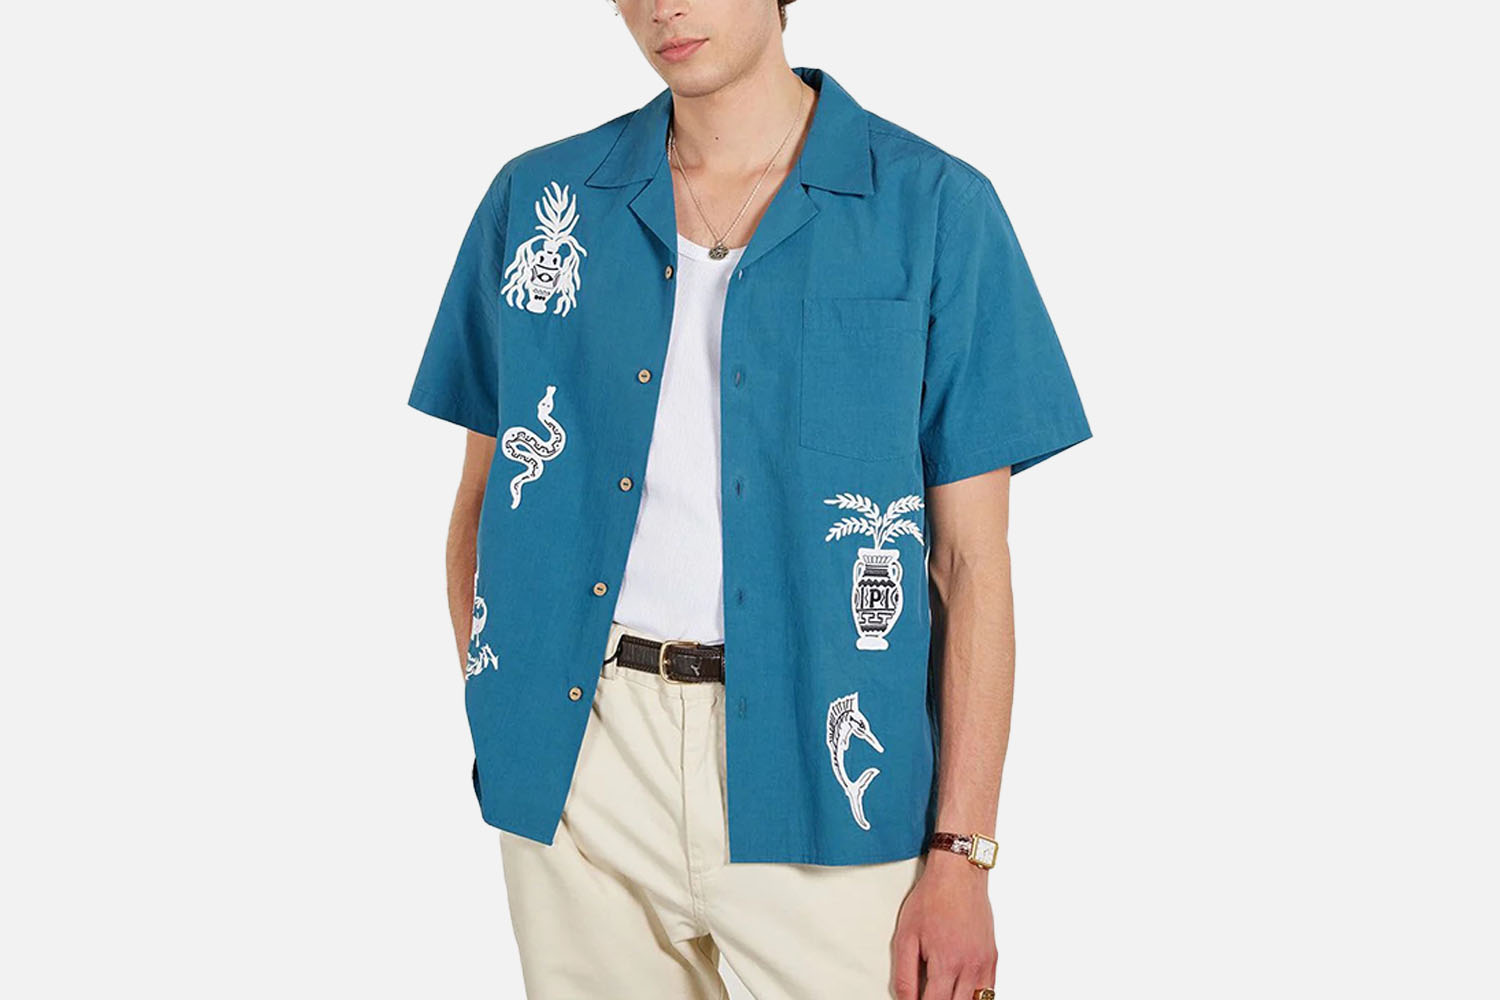 The "On Holiday" Offering: Percival Applique Tapestry Cuban Shirt